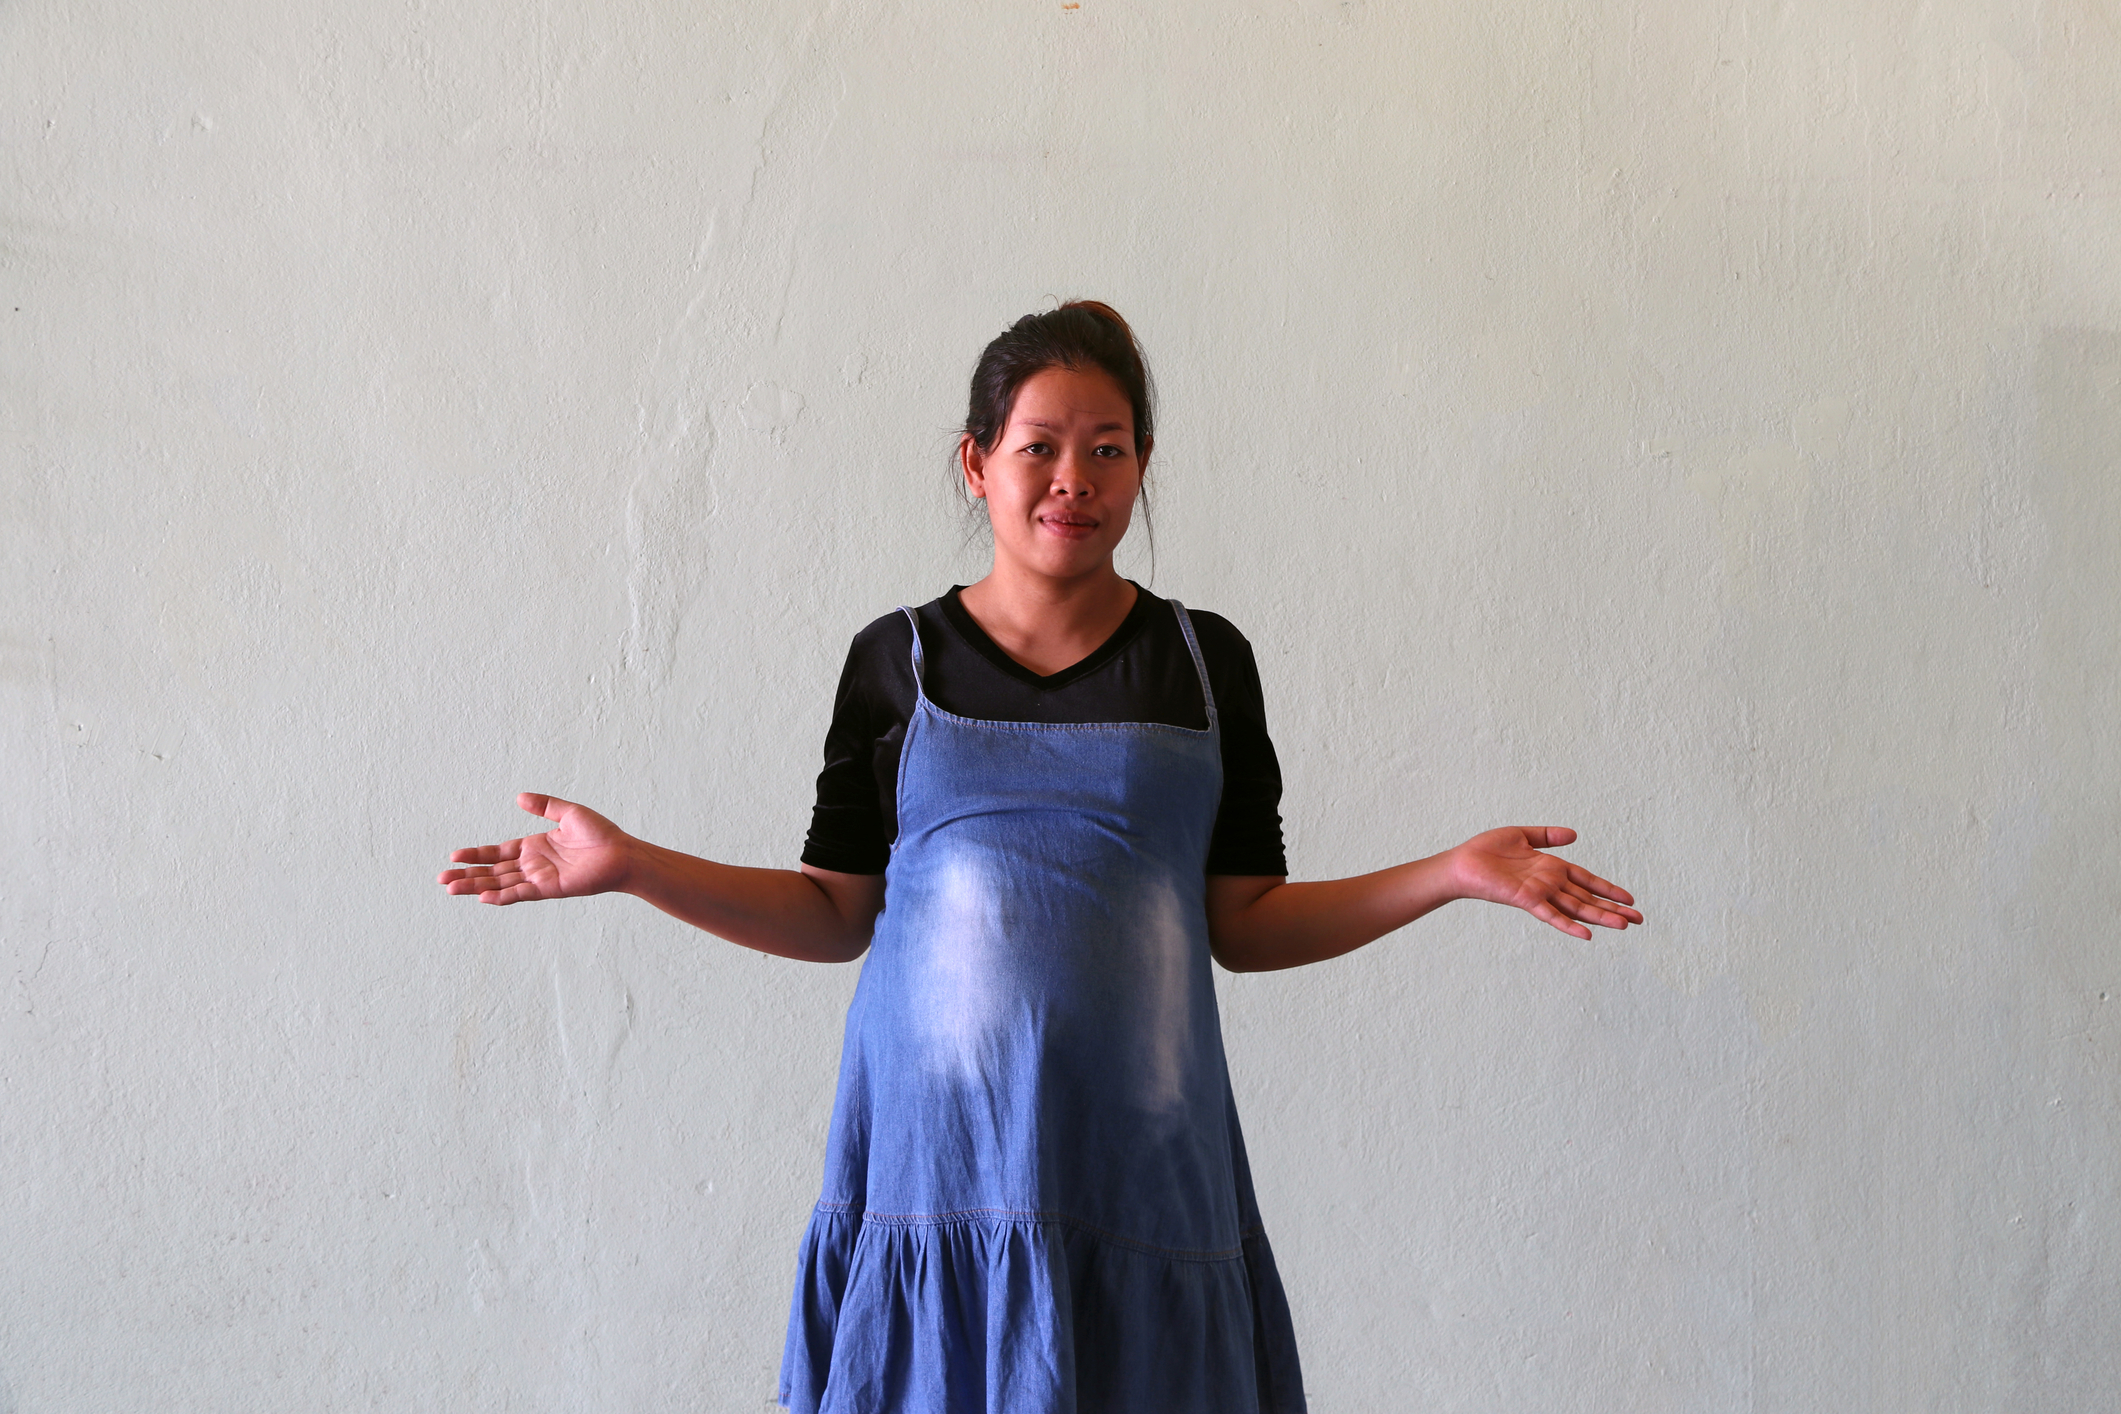 Pregnant woman use a denim skirt or jeans maternity clothes with black T-shirt, standing and waved both hands to the side of the body.